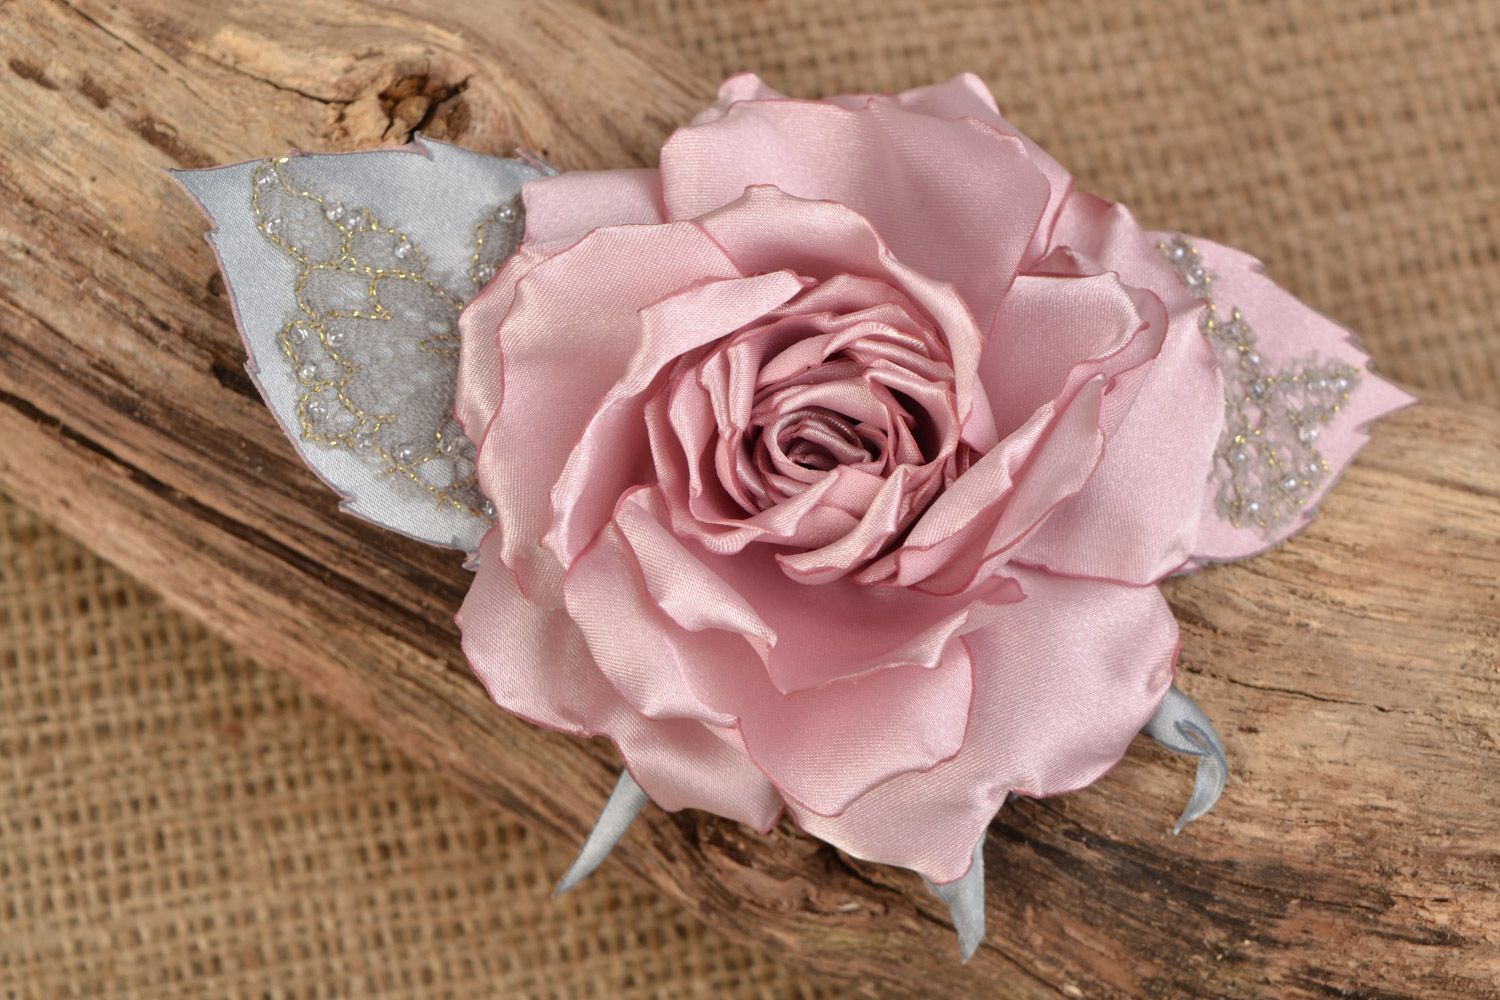 Handmade women's gentle satin flower brooch with lace Rose photo 1